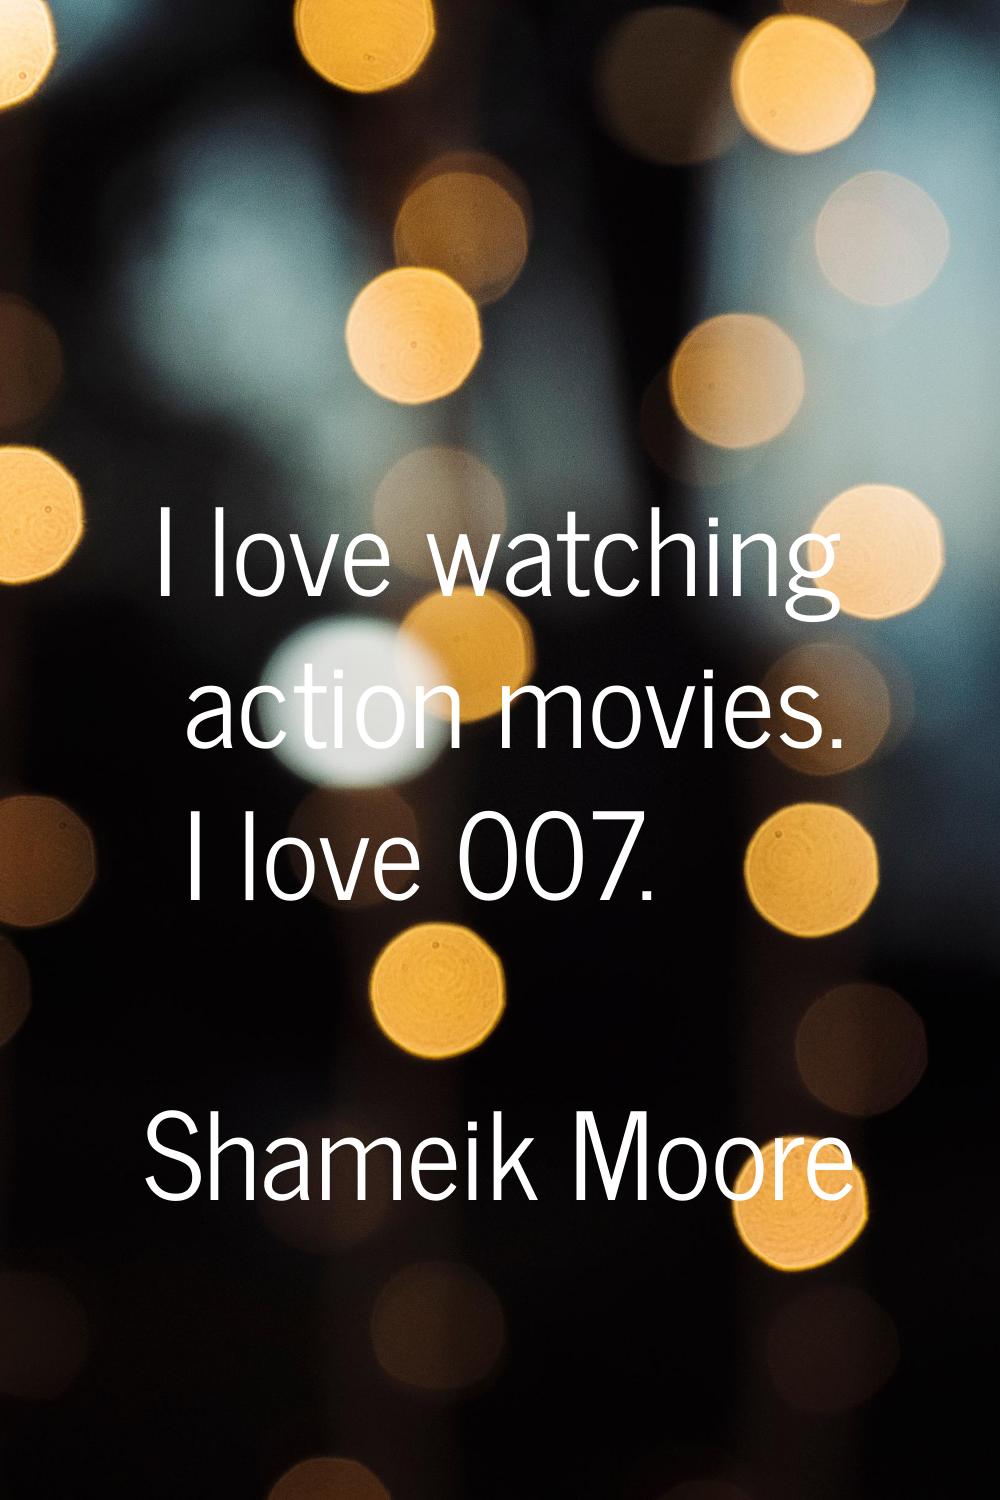 I love watching action movies. I love 007.